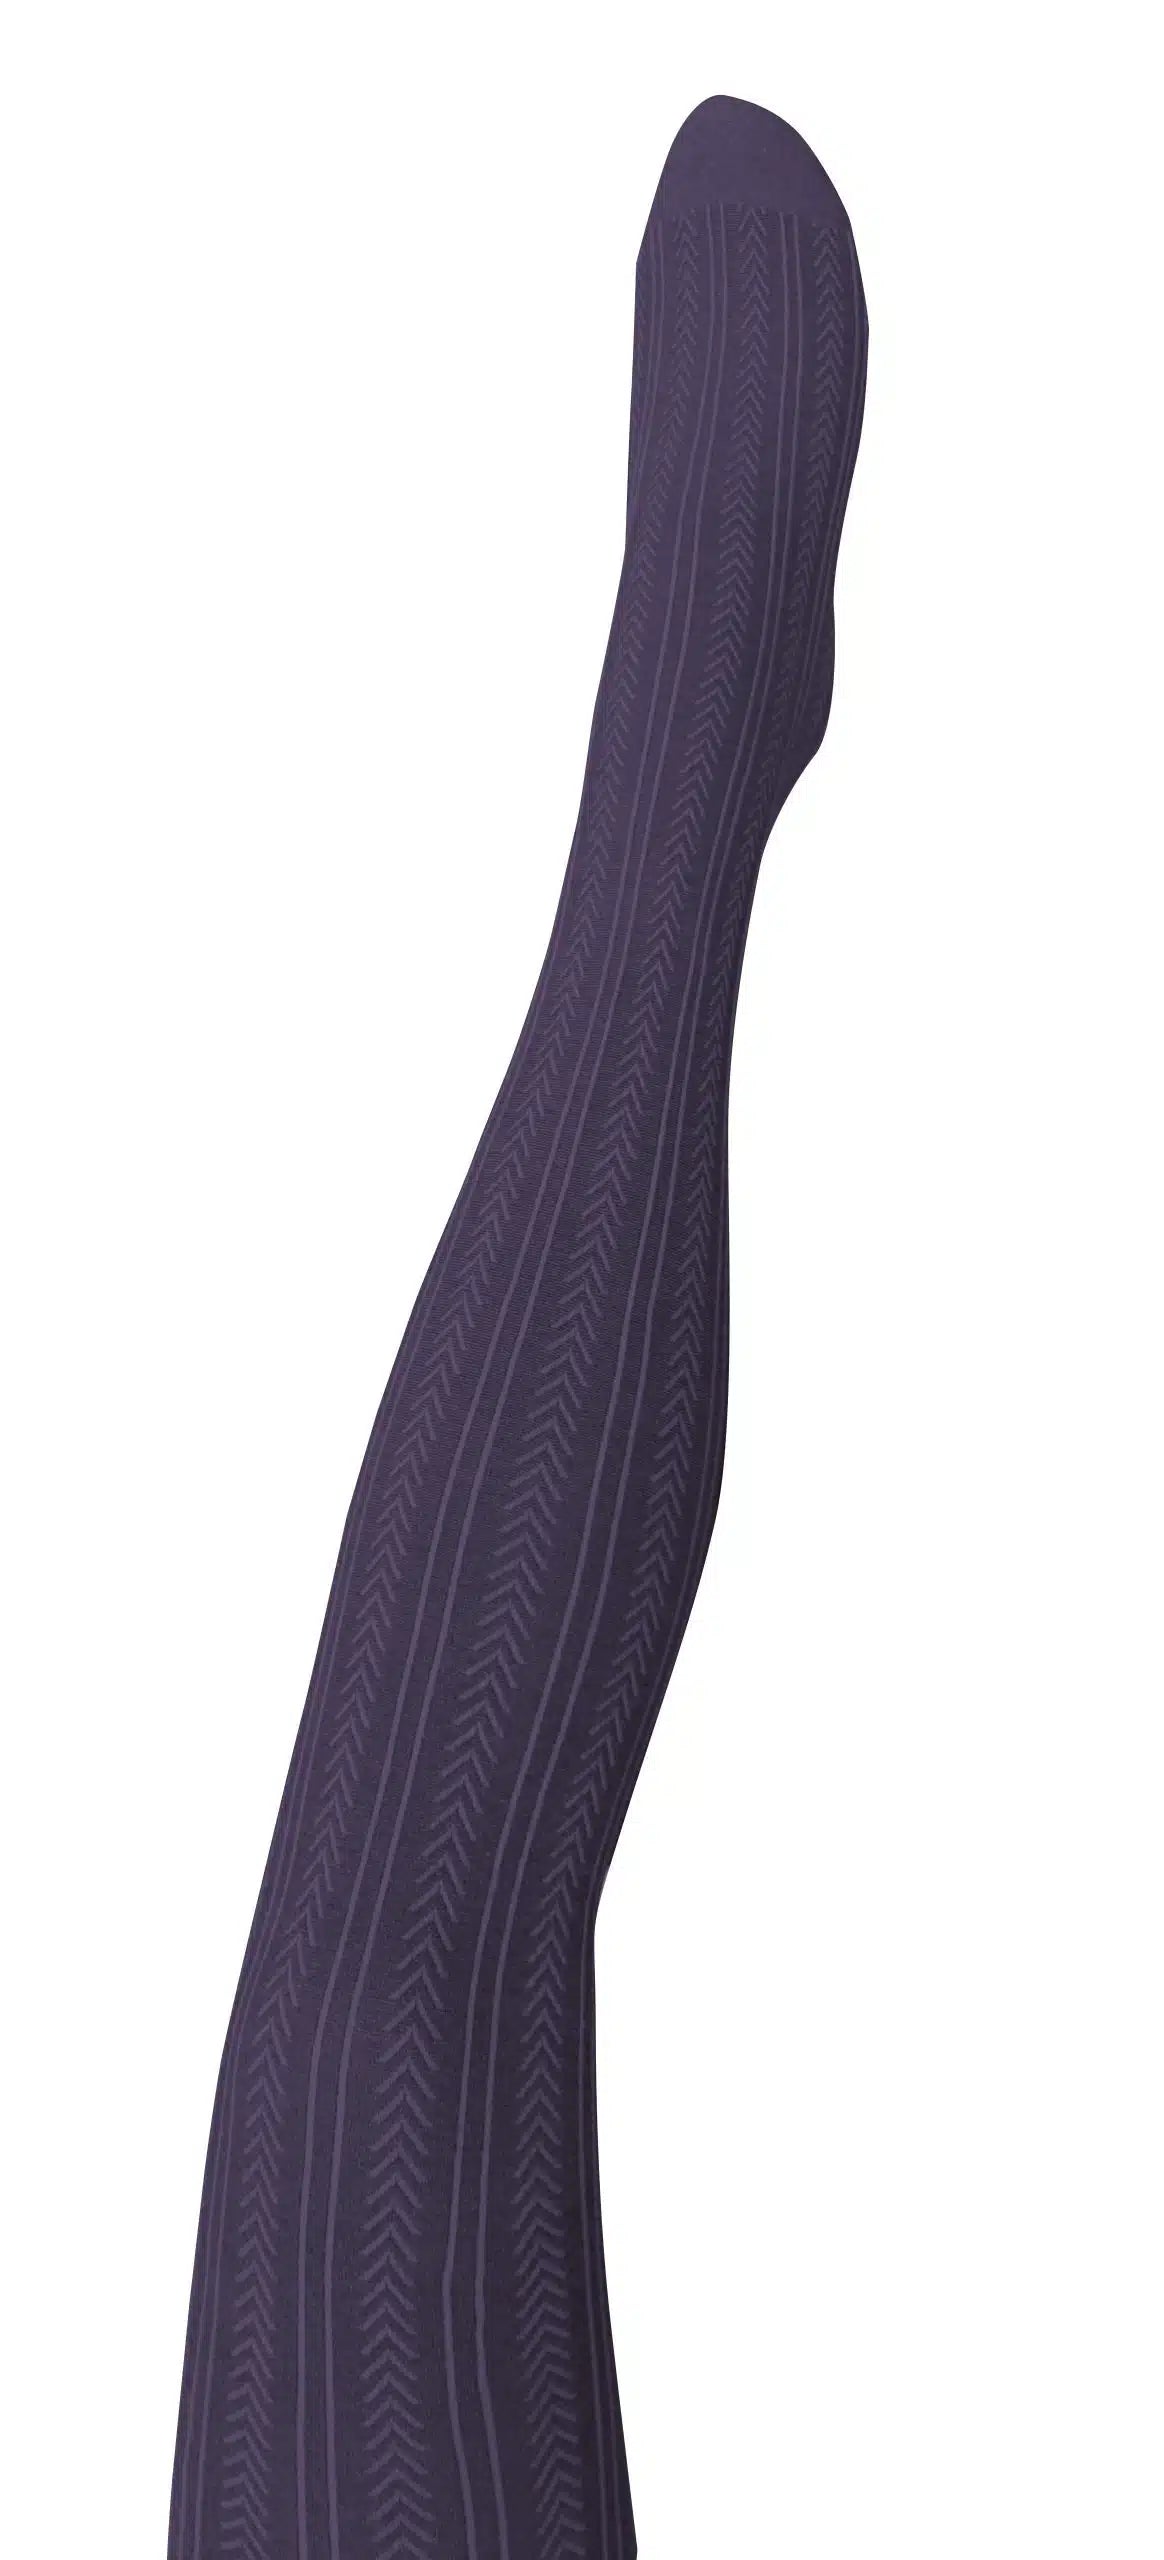 Tightology Chic Cotton Tights in Grape